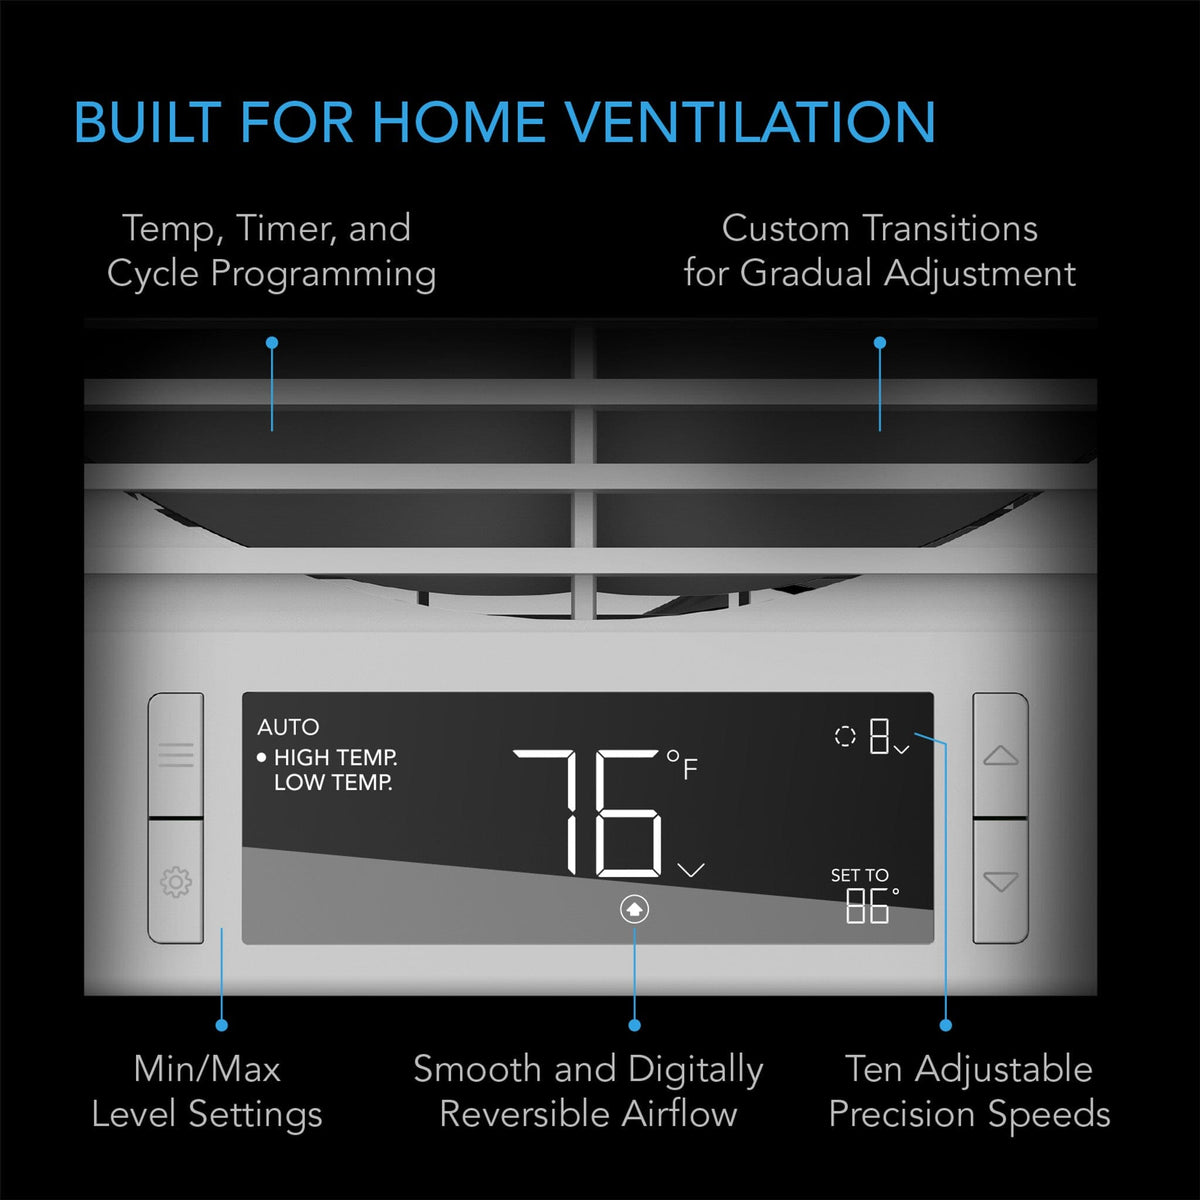 Built for home ventilation and control